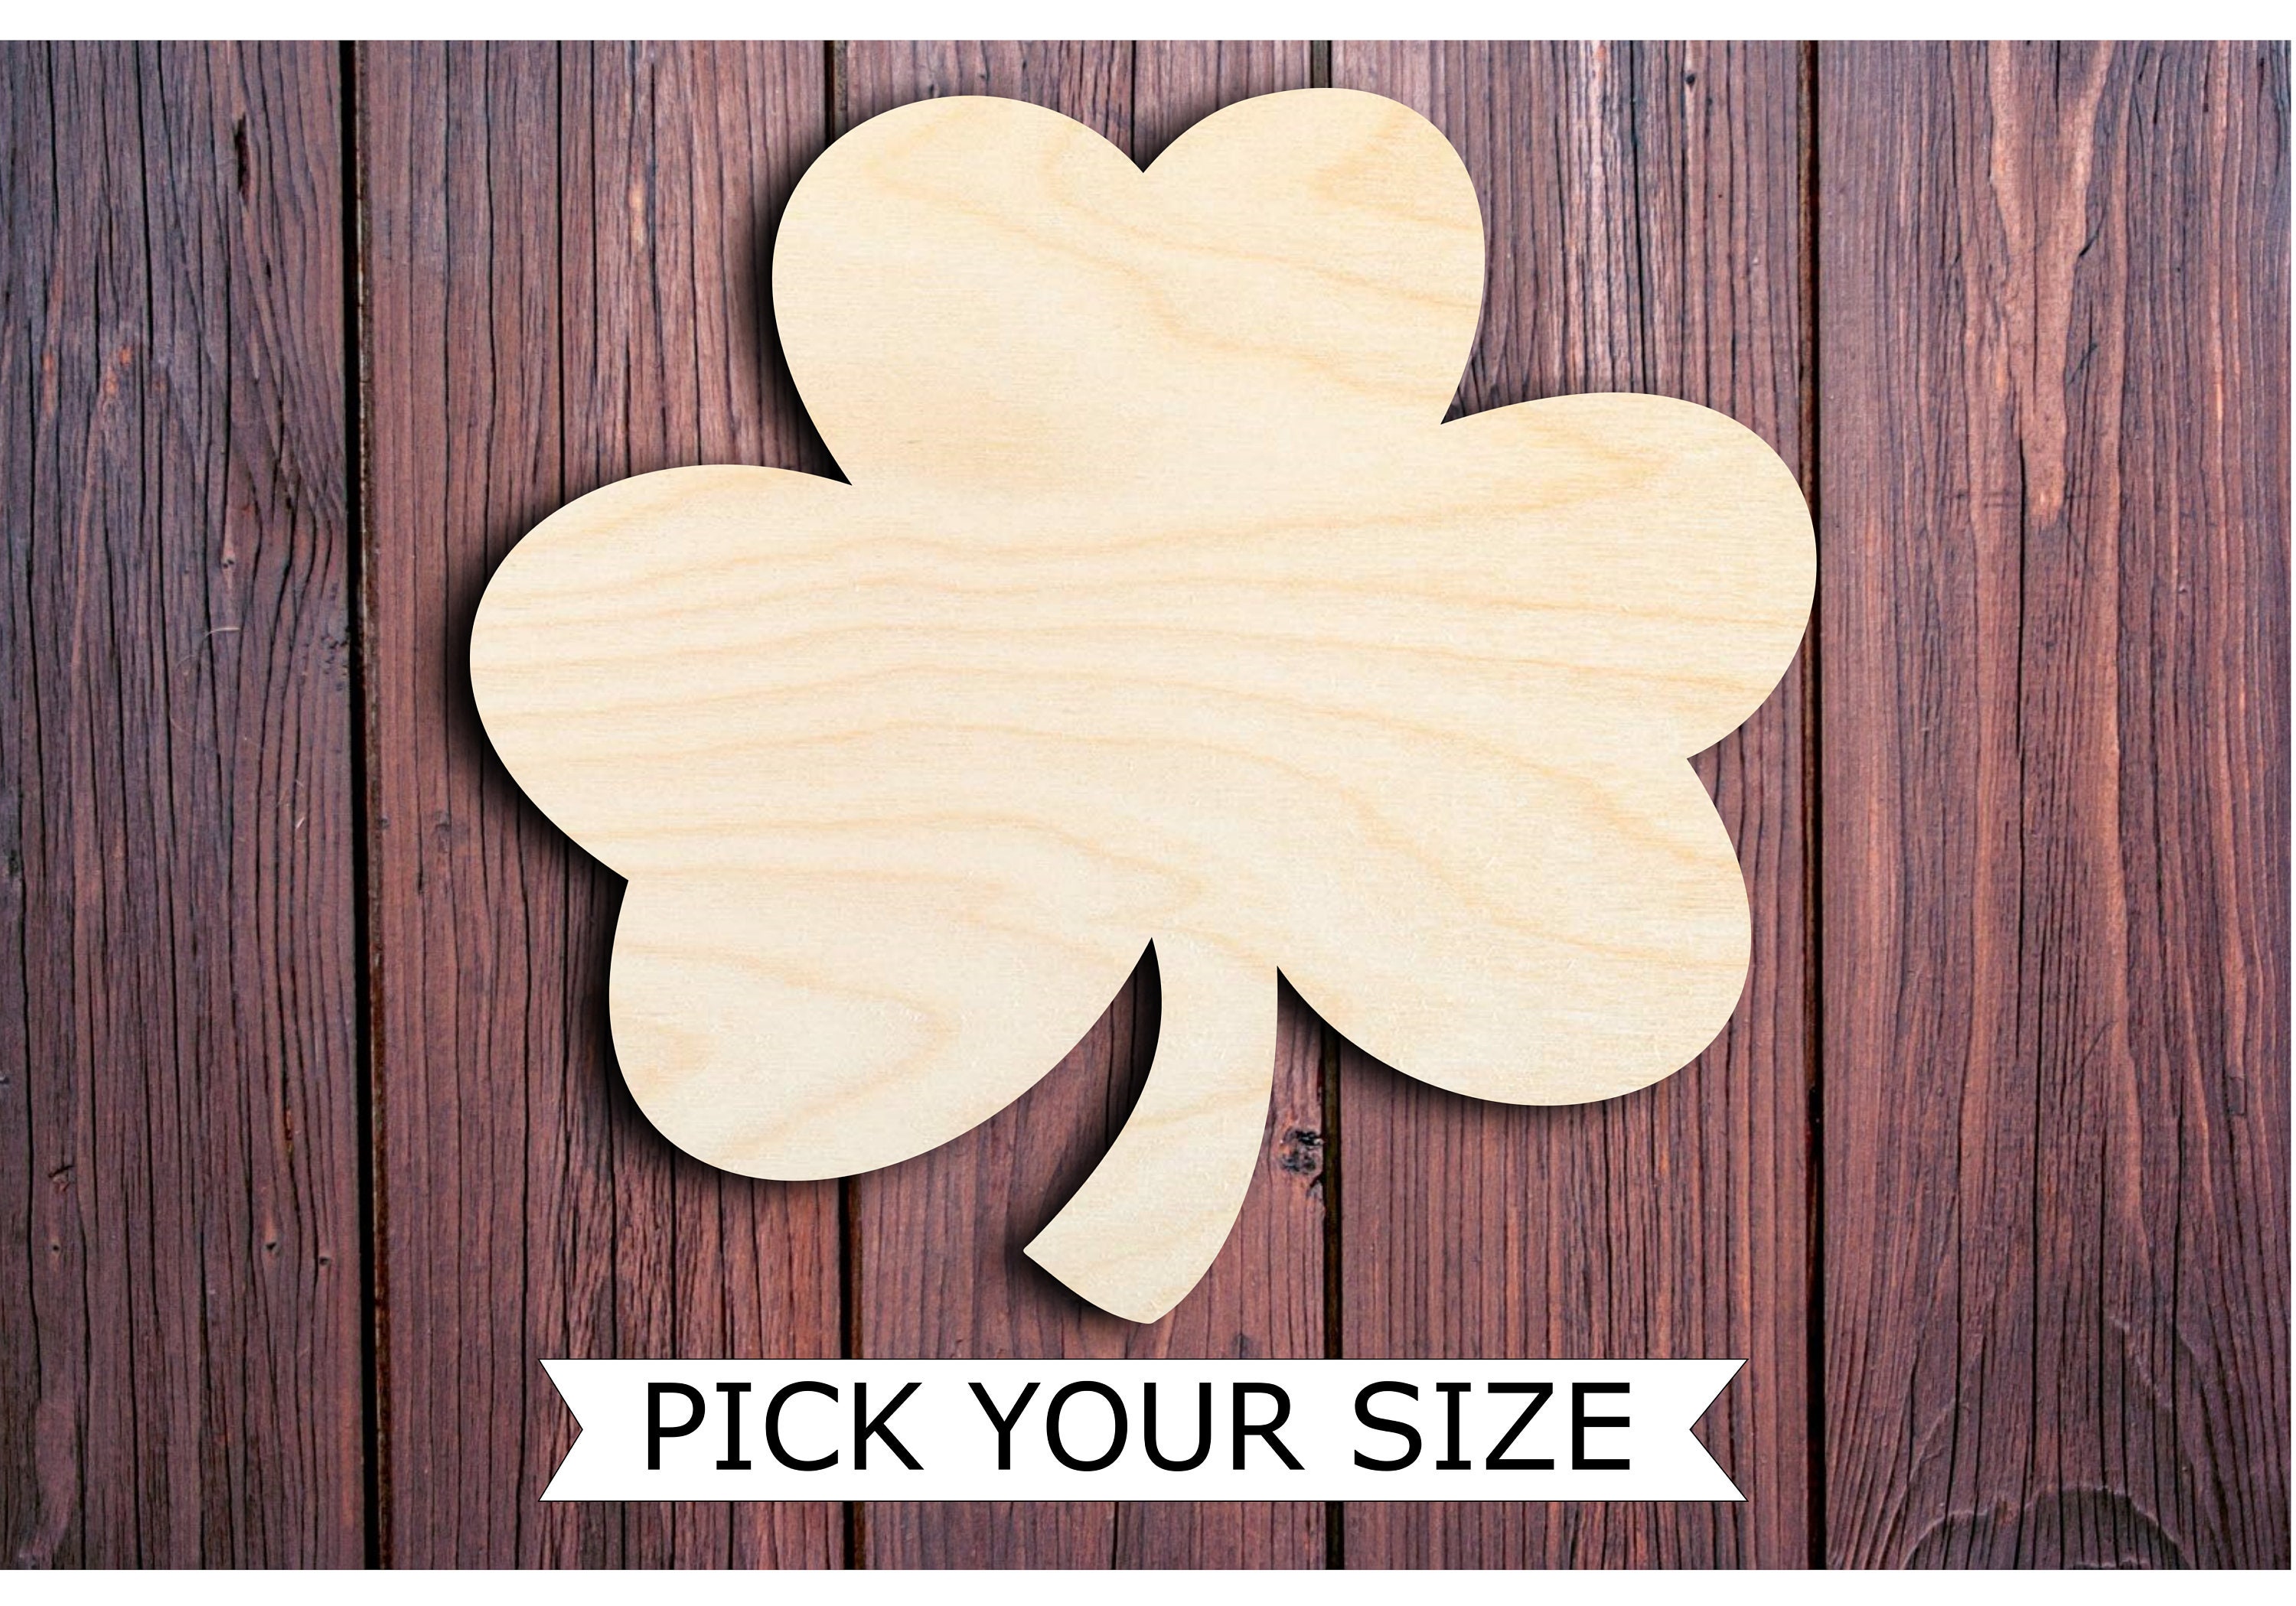 Large Wooden United States Cutout 9-3/4 x 16-inch, Pack of 50 Unfinished  Wood Crafts, Wooden Shapes for Crafts & School, by Woodpeckers 